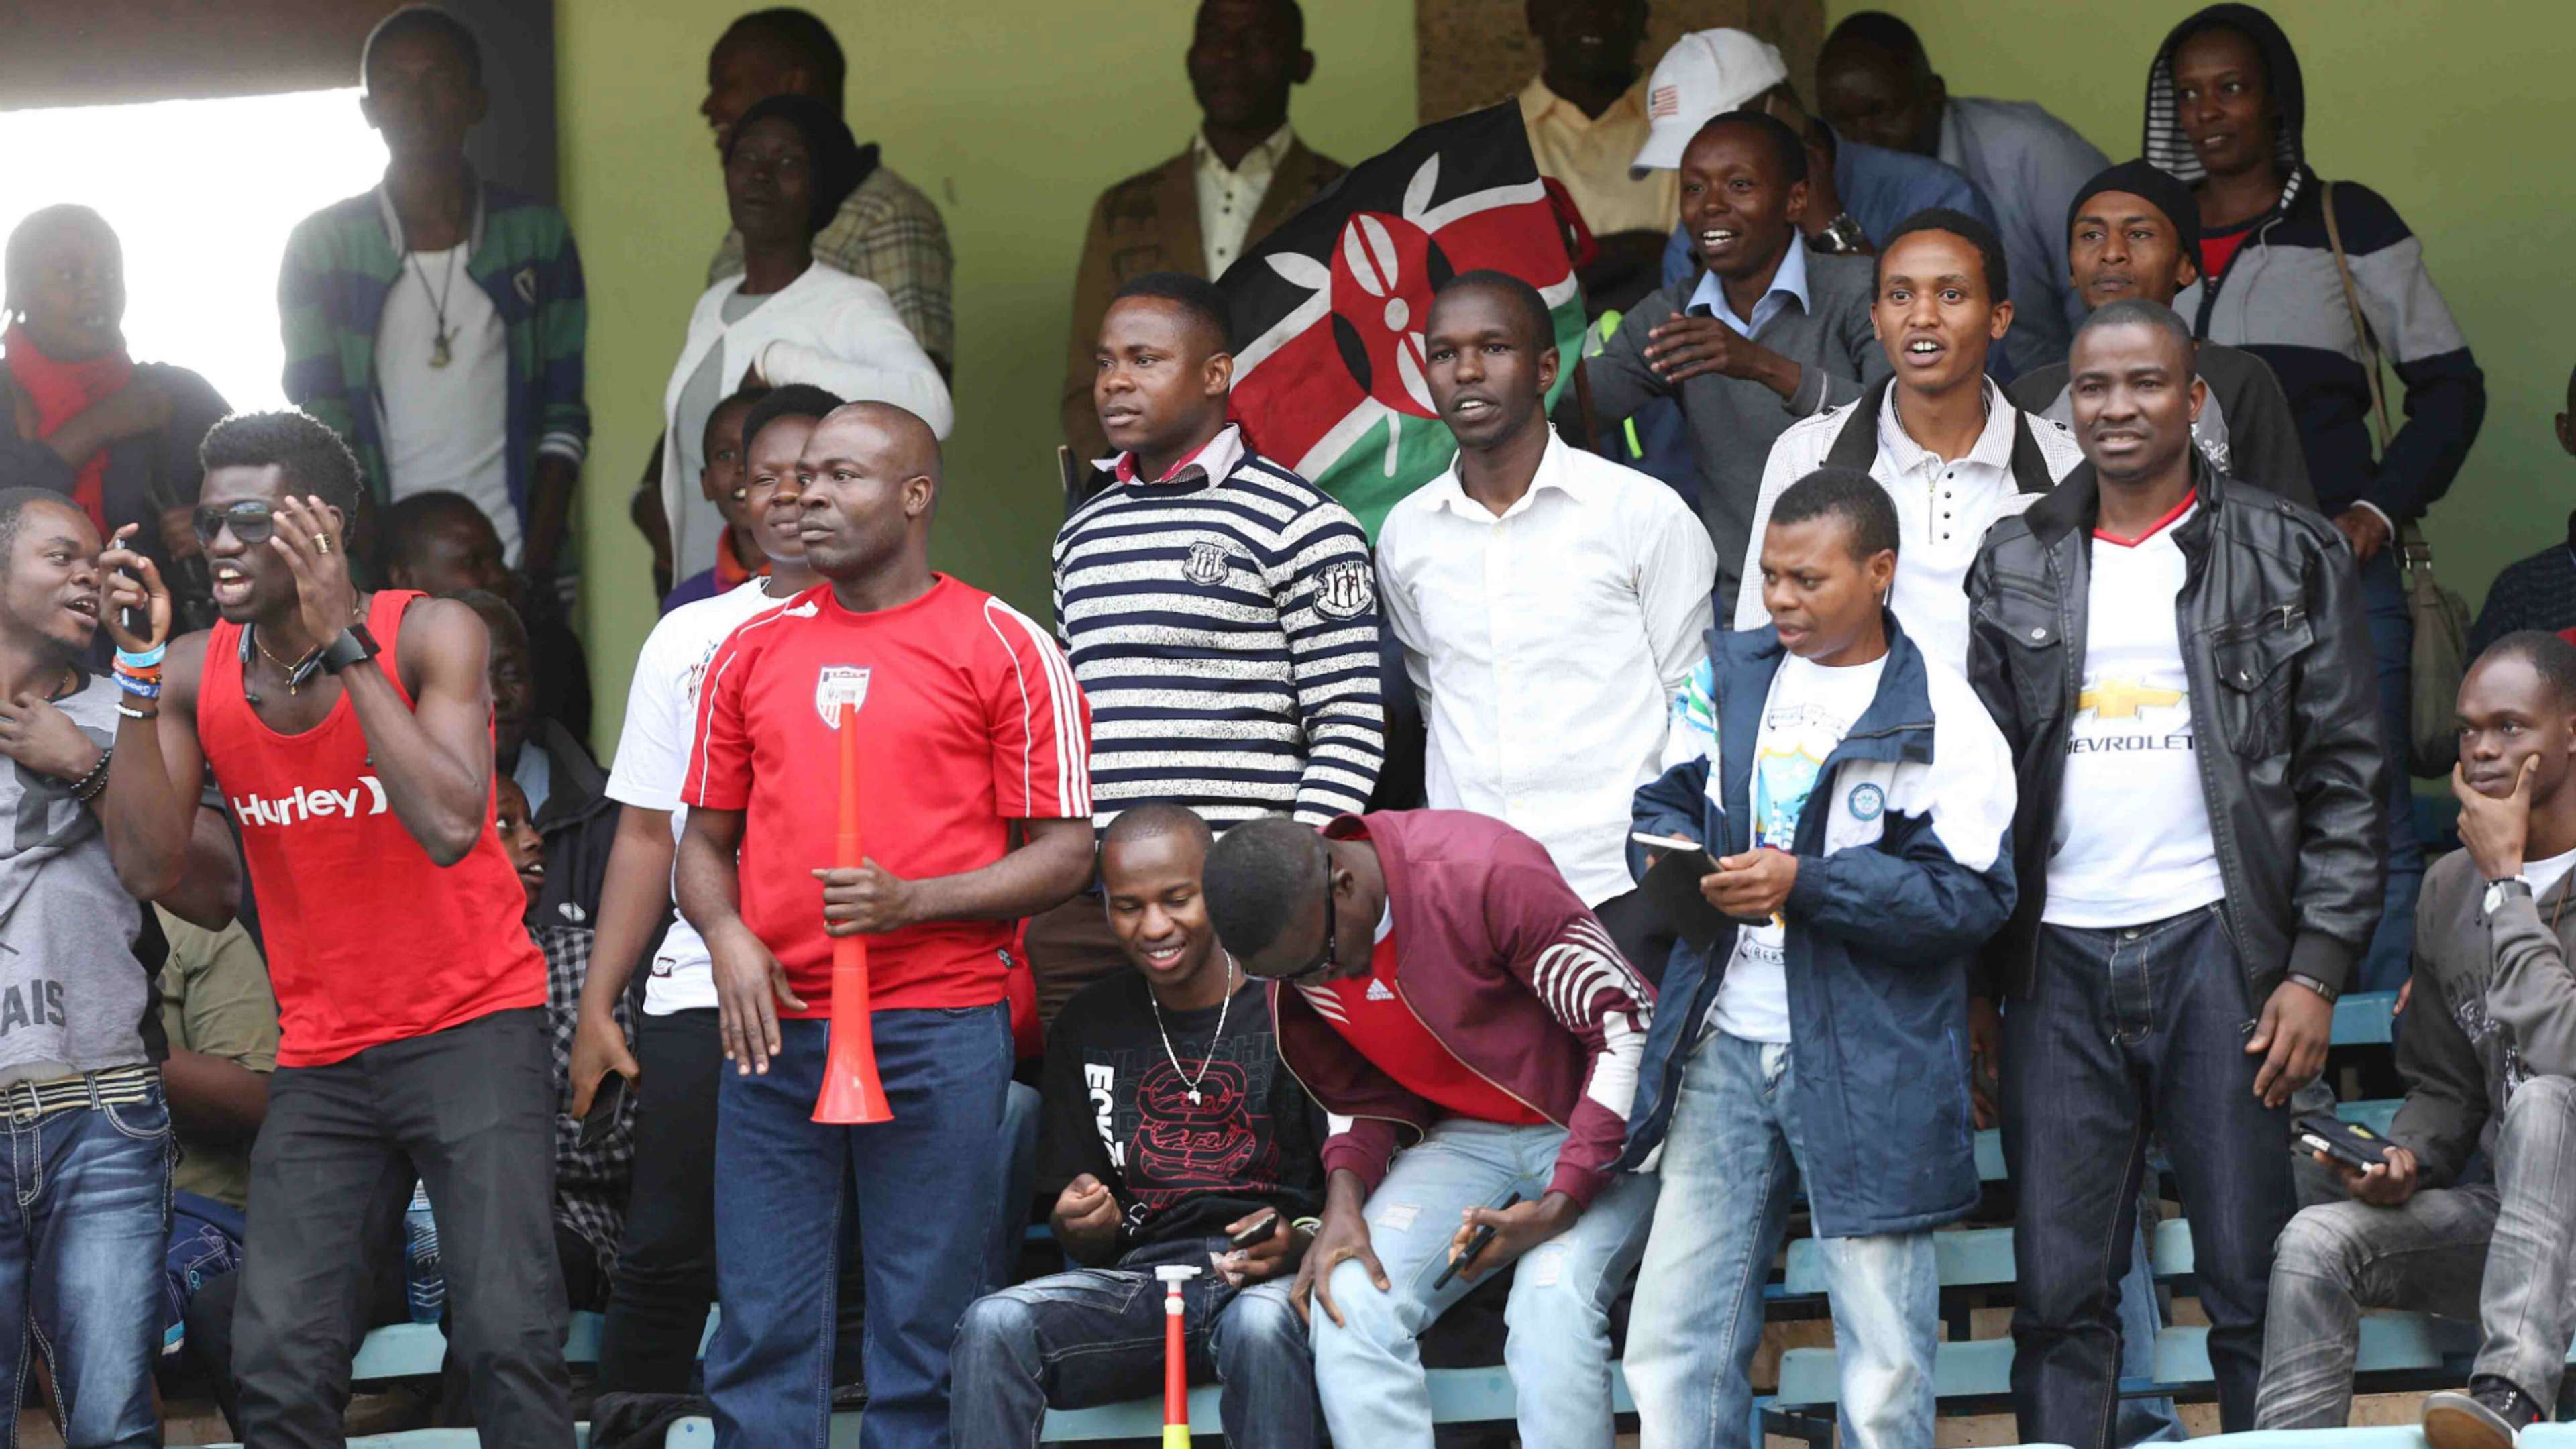 Harambee Stars fans turned out in large numbers to cheer the team